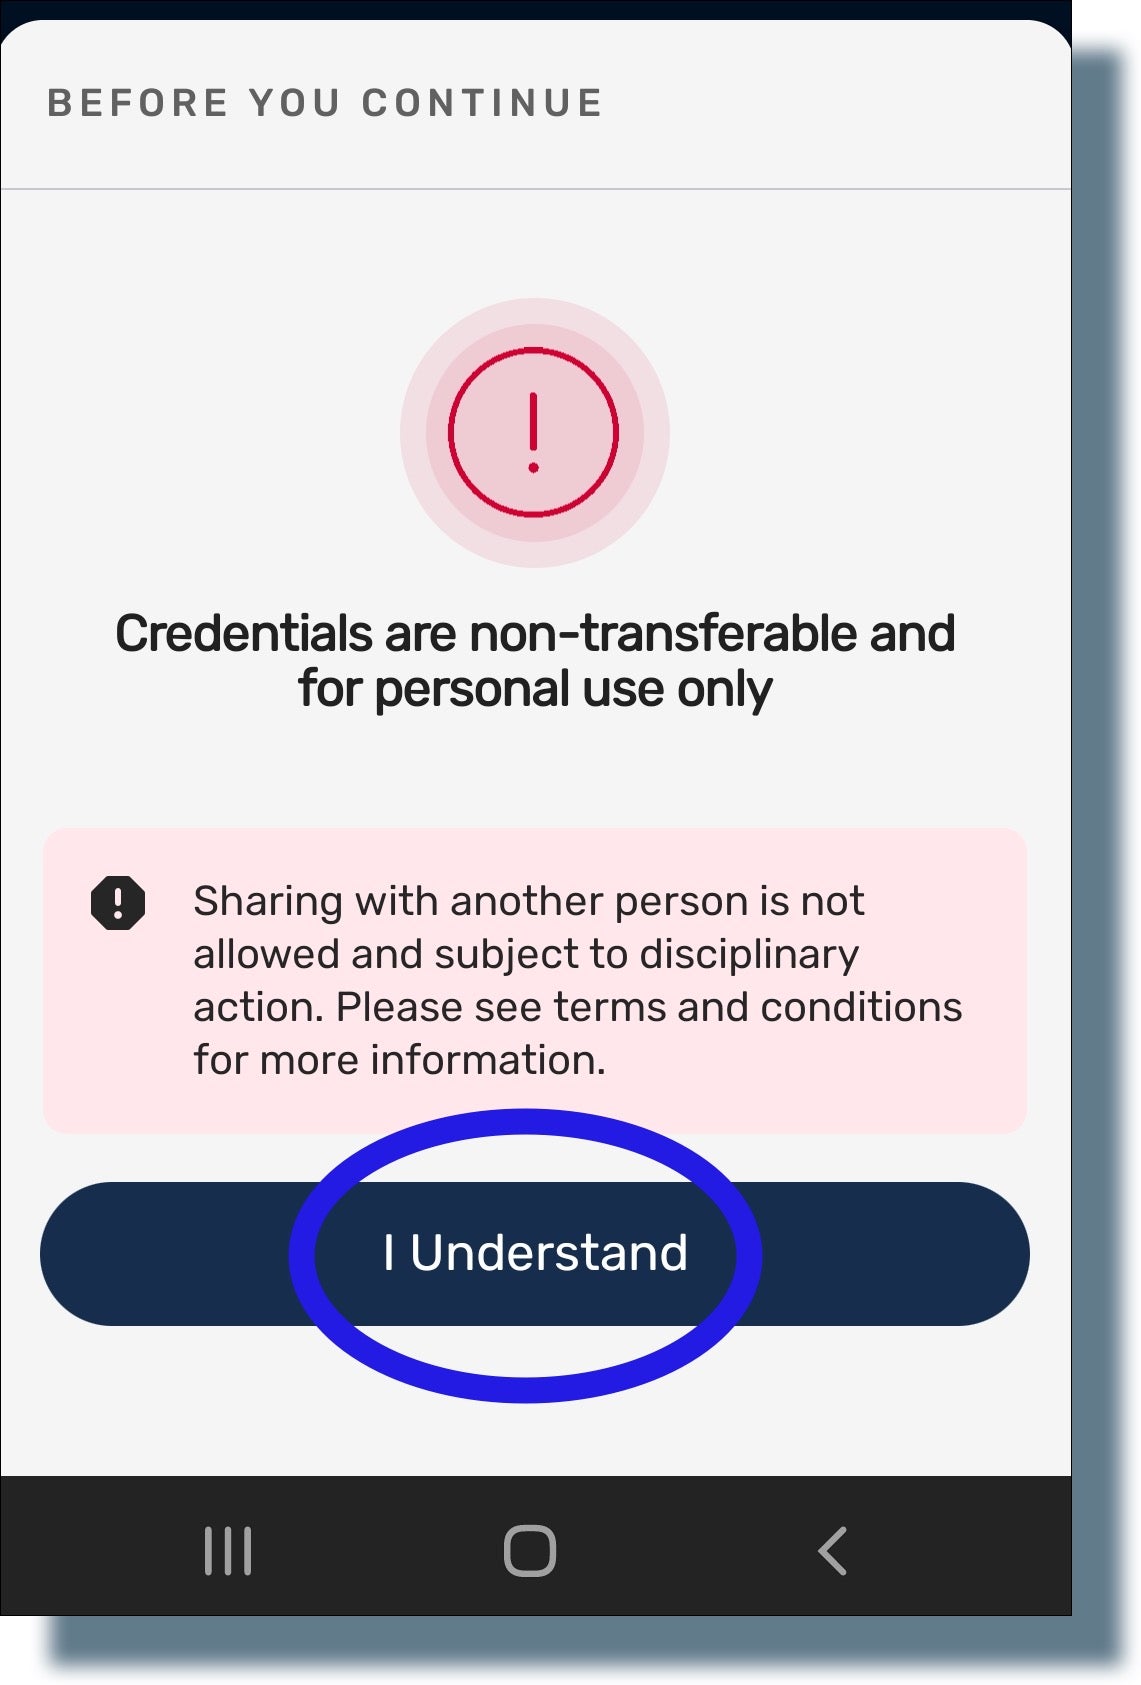 Screen explaining rules on sharing with others, and user selecting the 'I Understand' button.